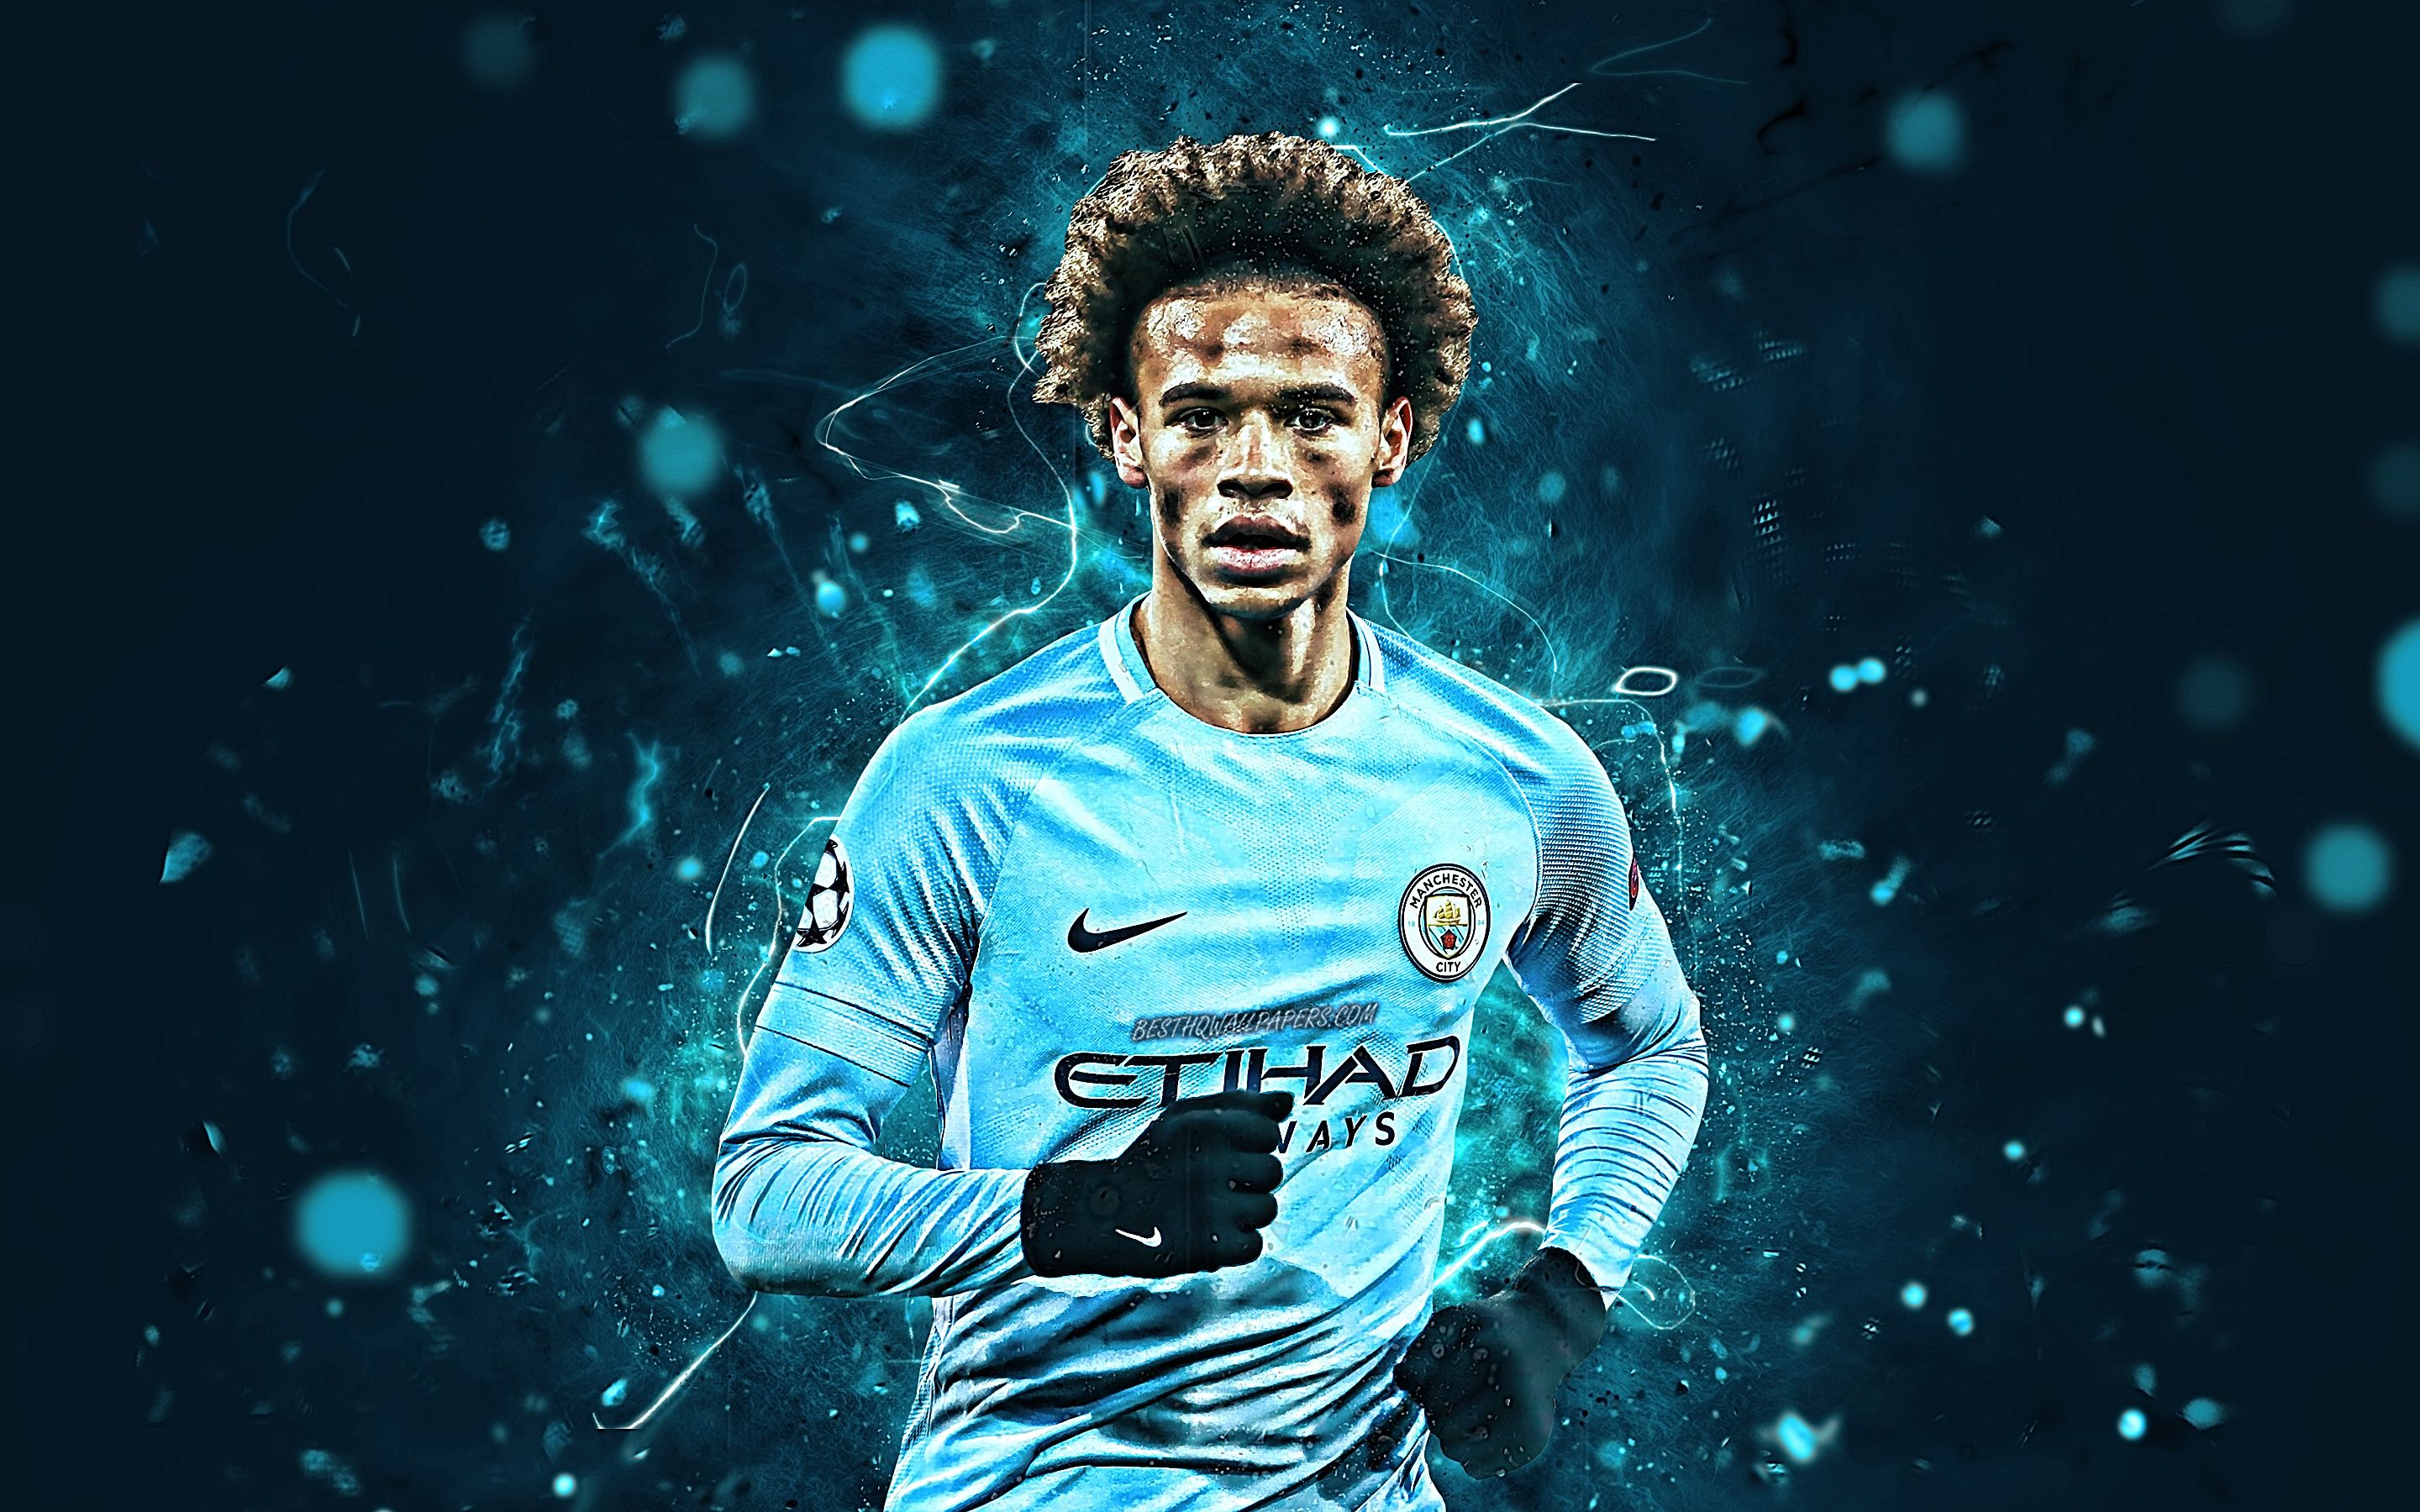 Download Wallpaper Leroy Sane, Close Up, German Footballers, Manchester City FC, Soccer, Sane, Abstract Art, Premier League, Midfielder, Man City, Footballers, Neon Lights For Desktop With Resolution 2880x1800. High Quality HD Picture Wallpaper